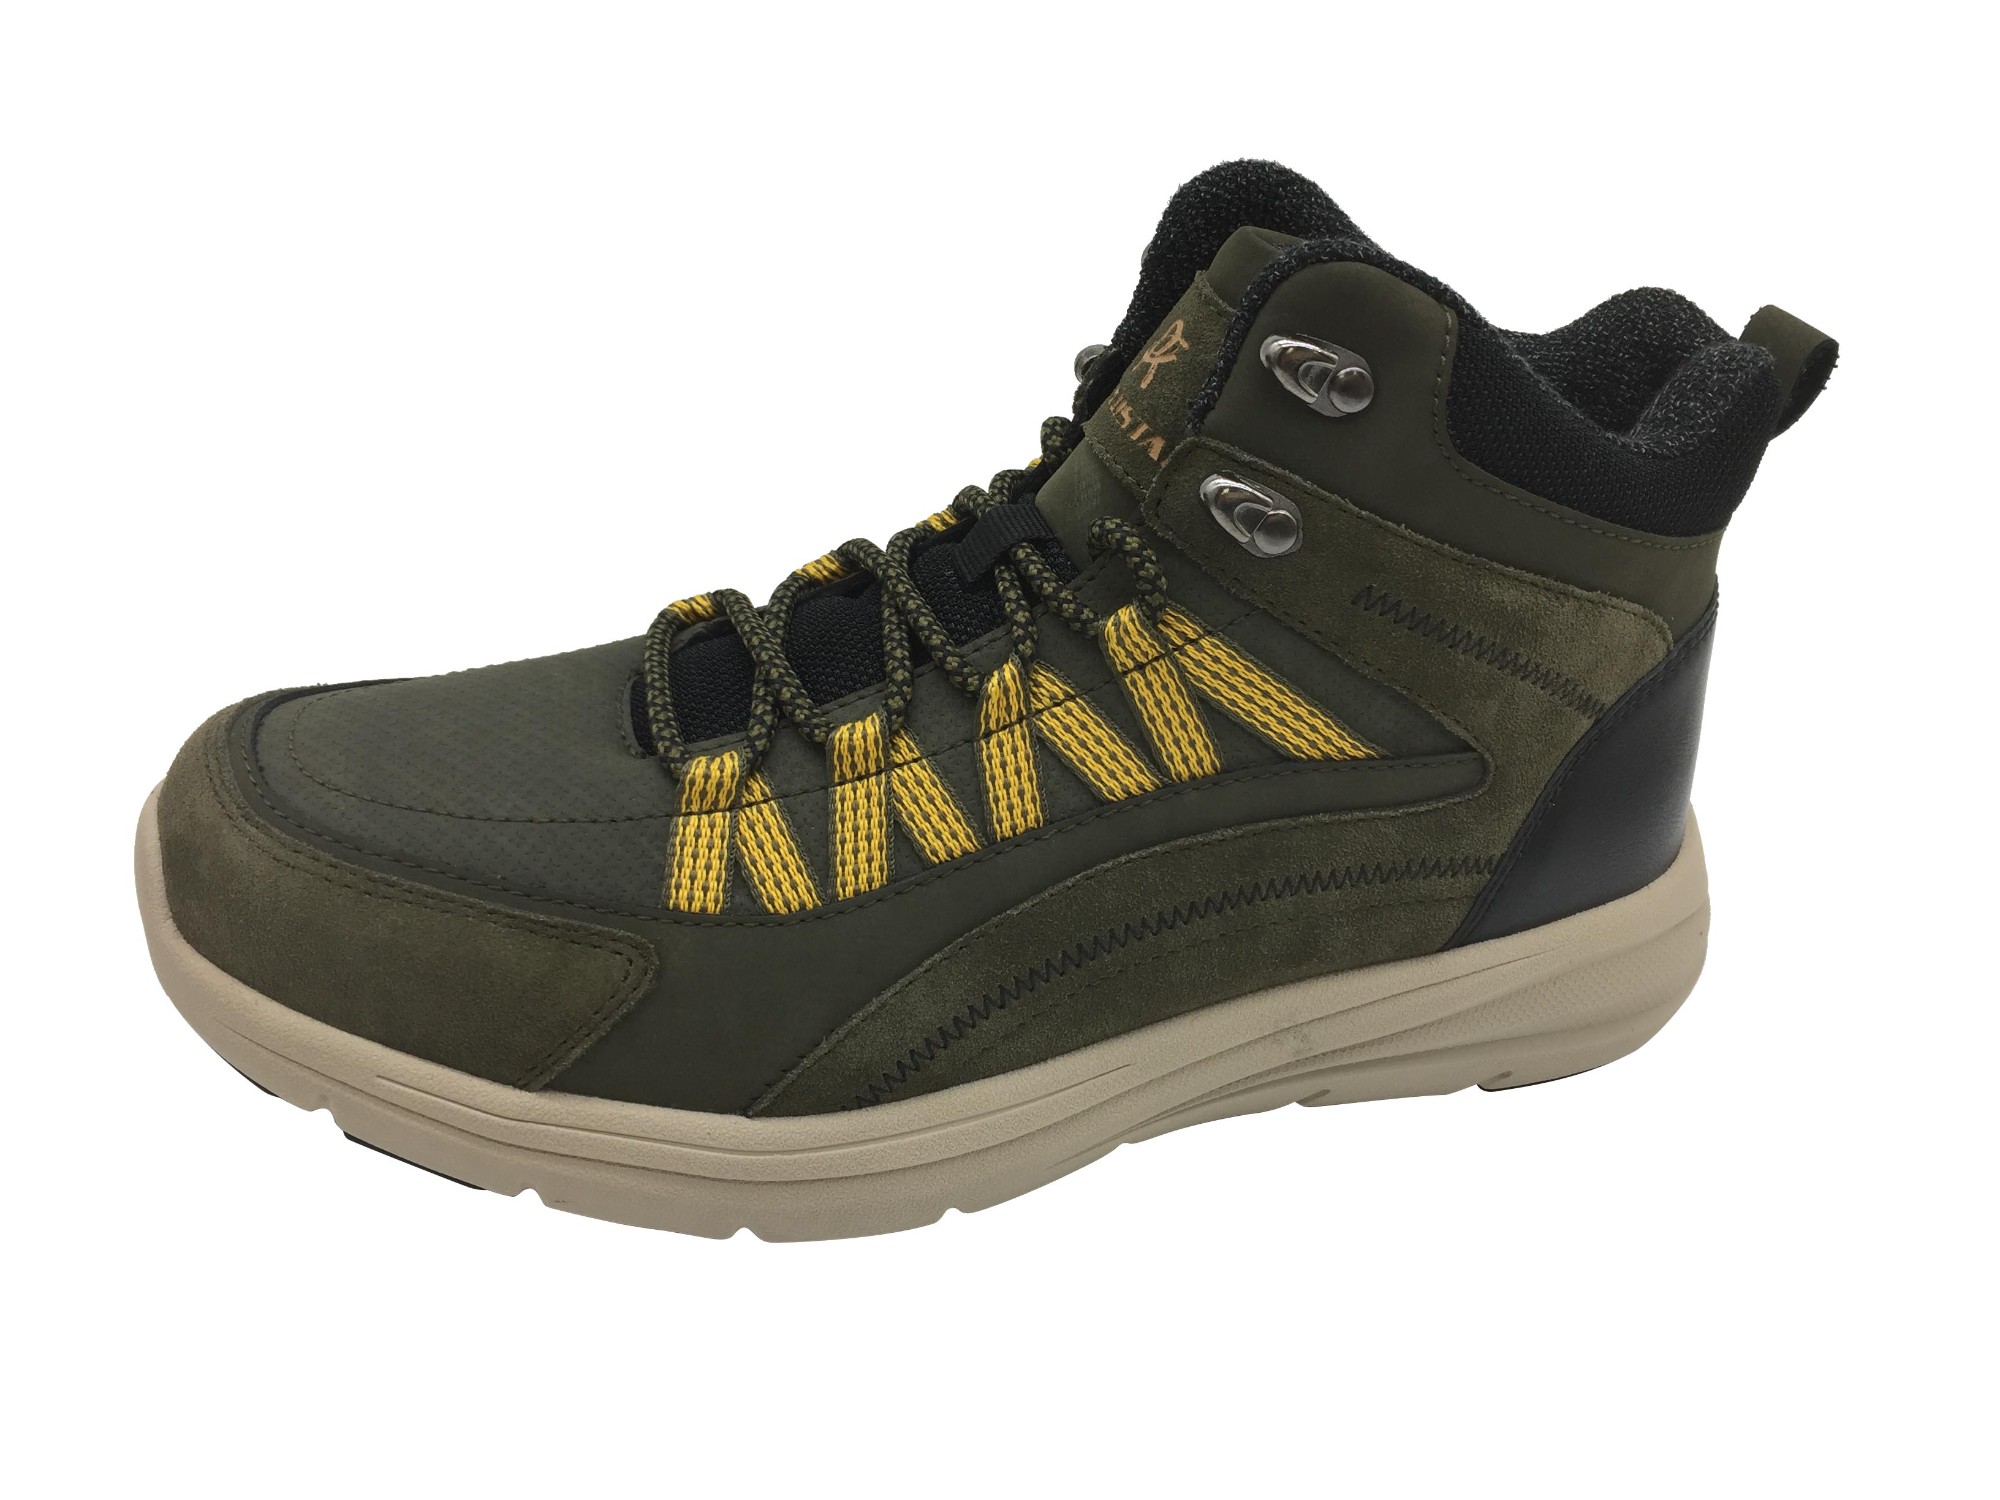 High Quality Hiking Boots Men's Treker Shoes Outdoor Trekking Shoes For Men